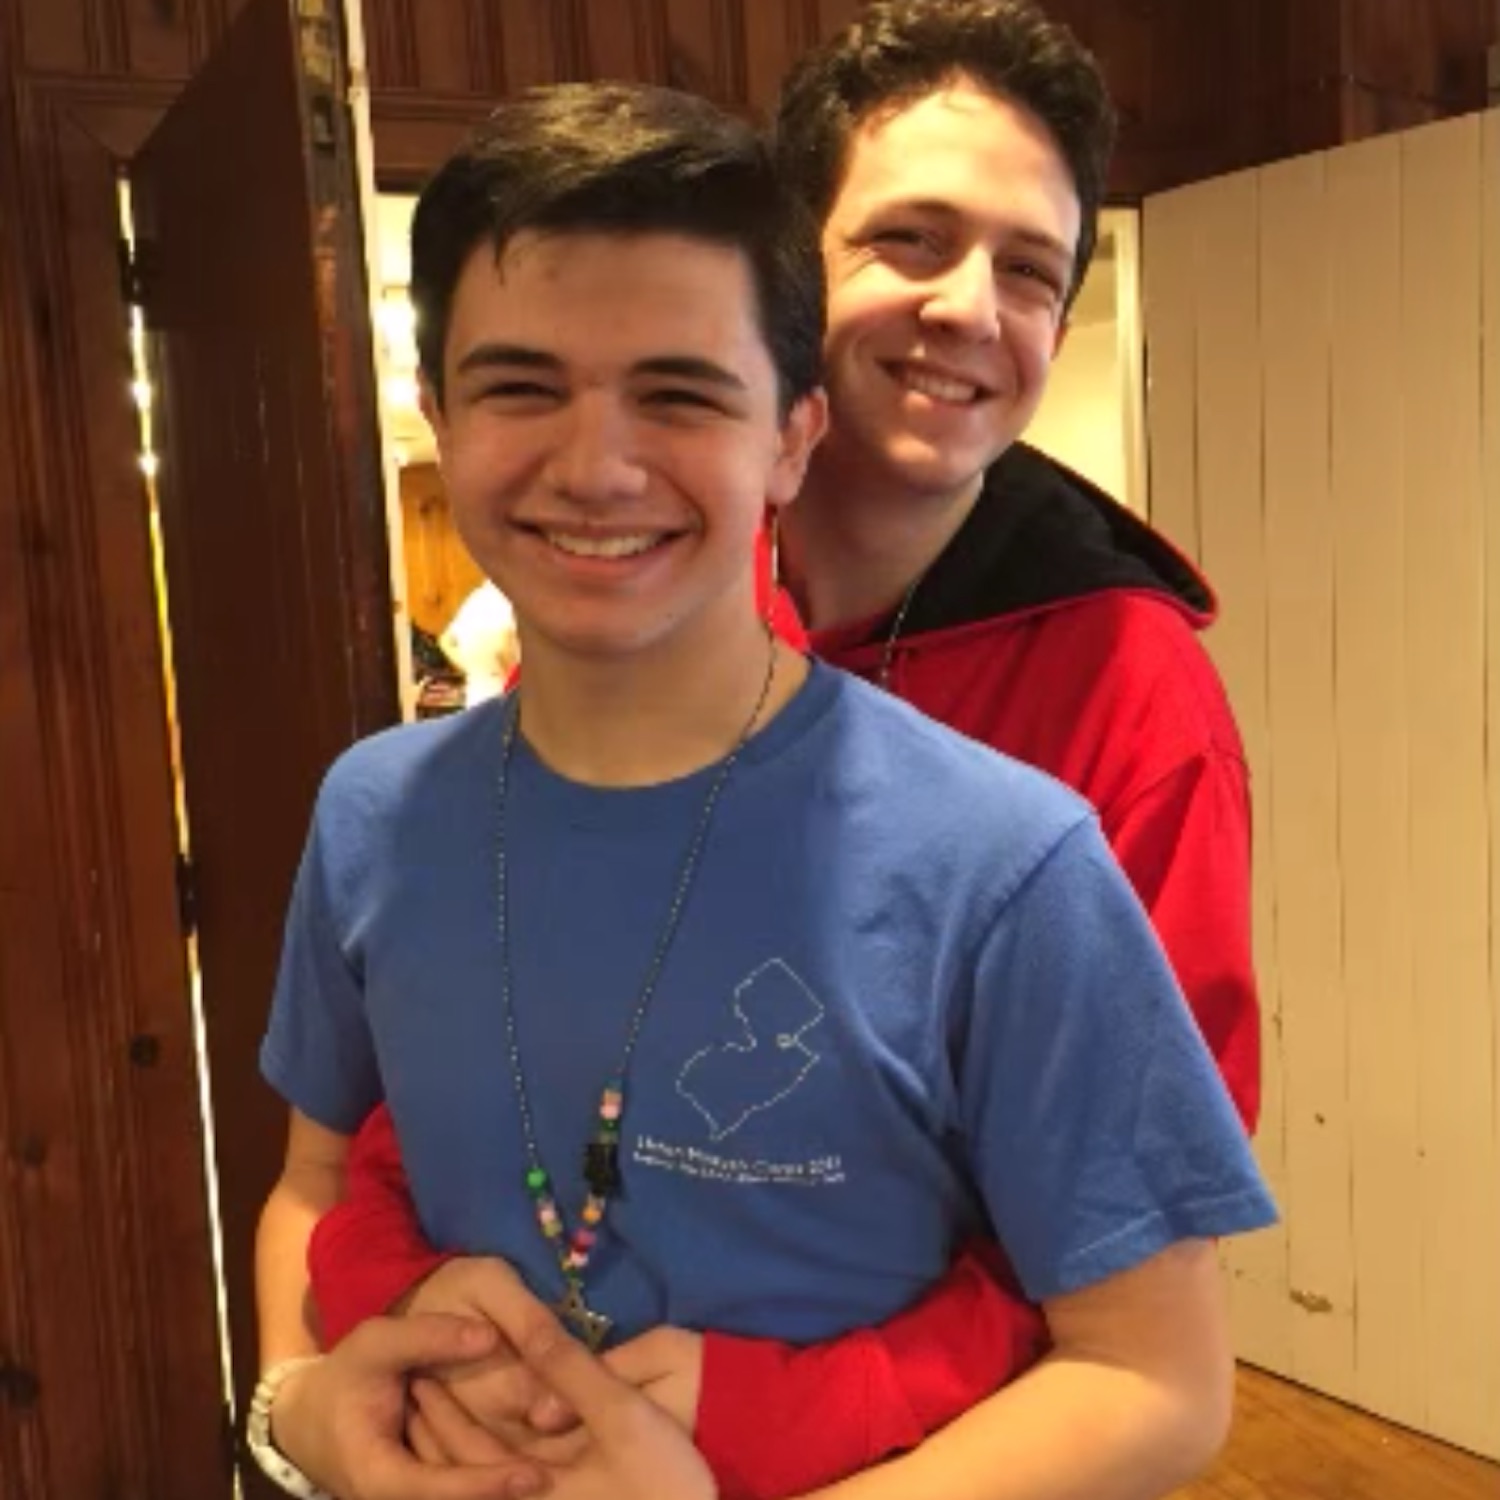 Check out the beautiful moment this gay student comes out, asks his classmate to prom ...1500 x 1500